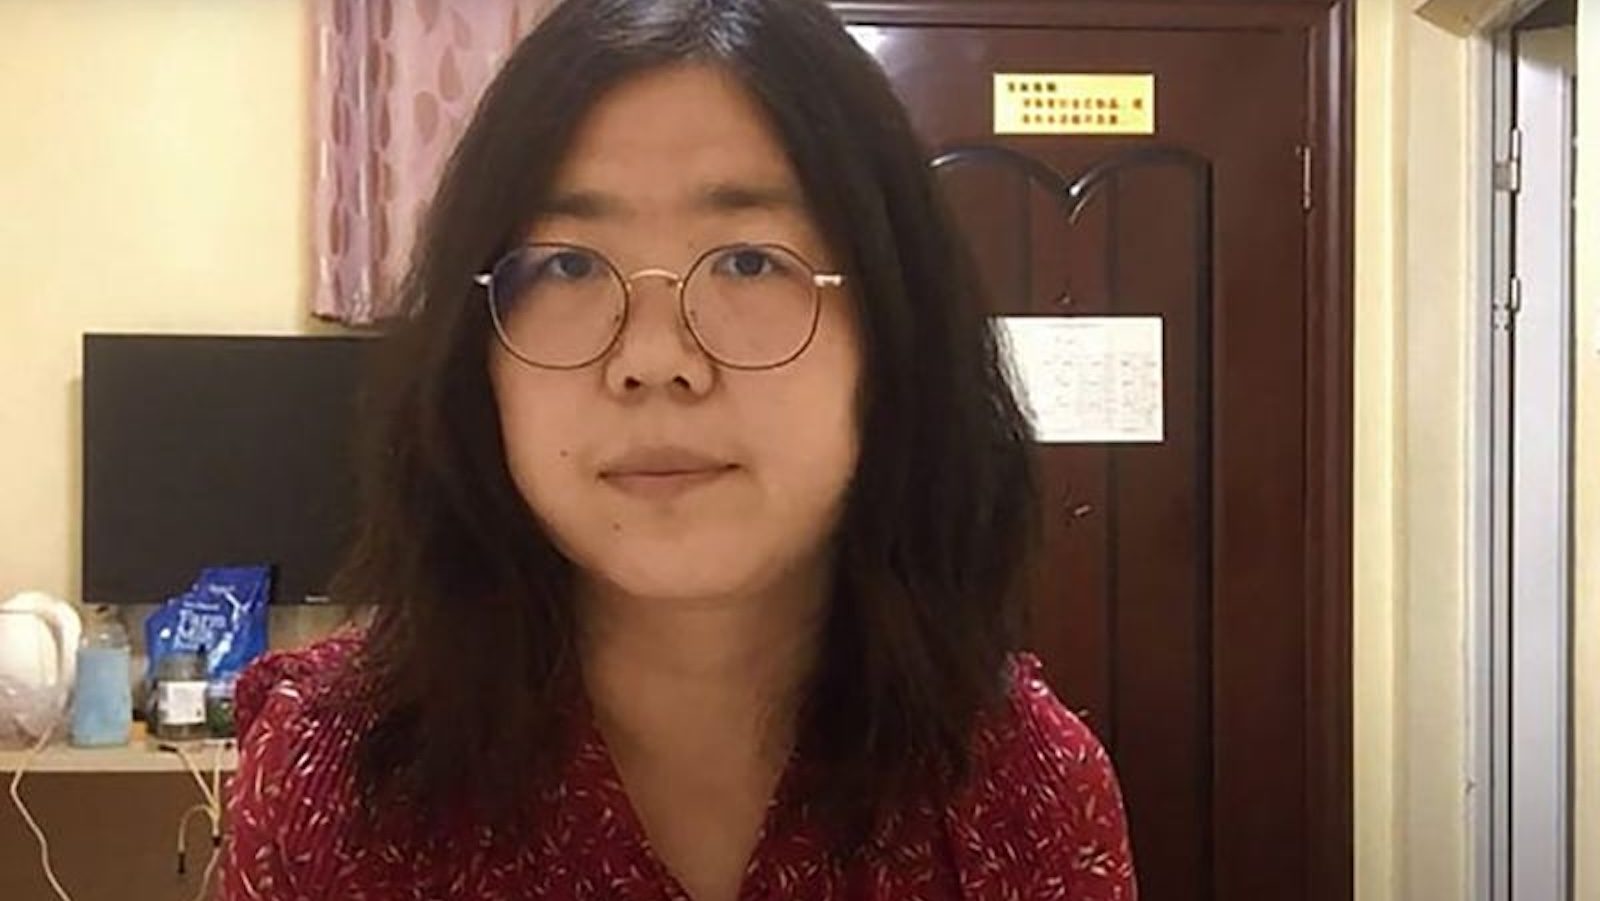 Chinese journalist Zhang Zhan, imprisoned for her reporting on the coronavirus, will be released after four years in prison